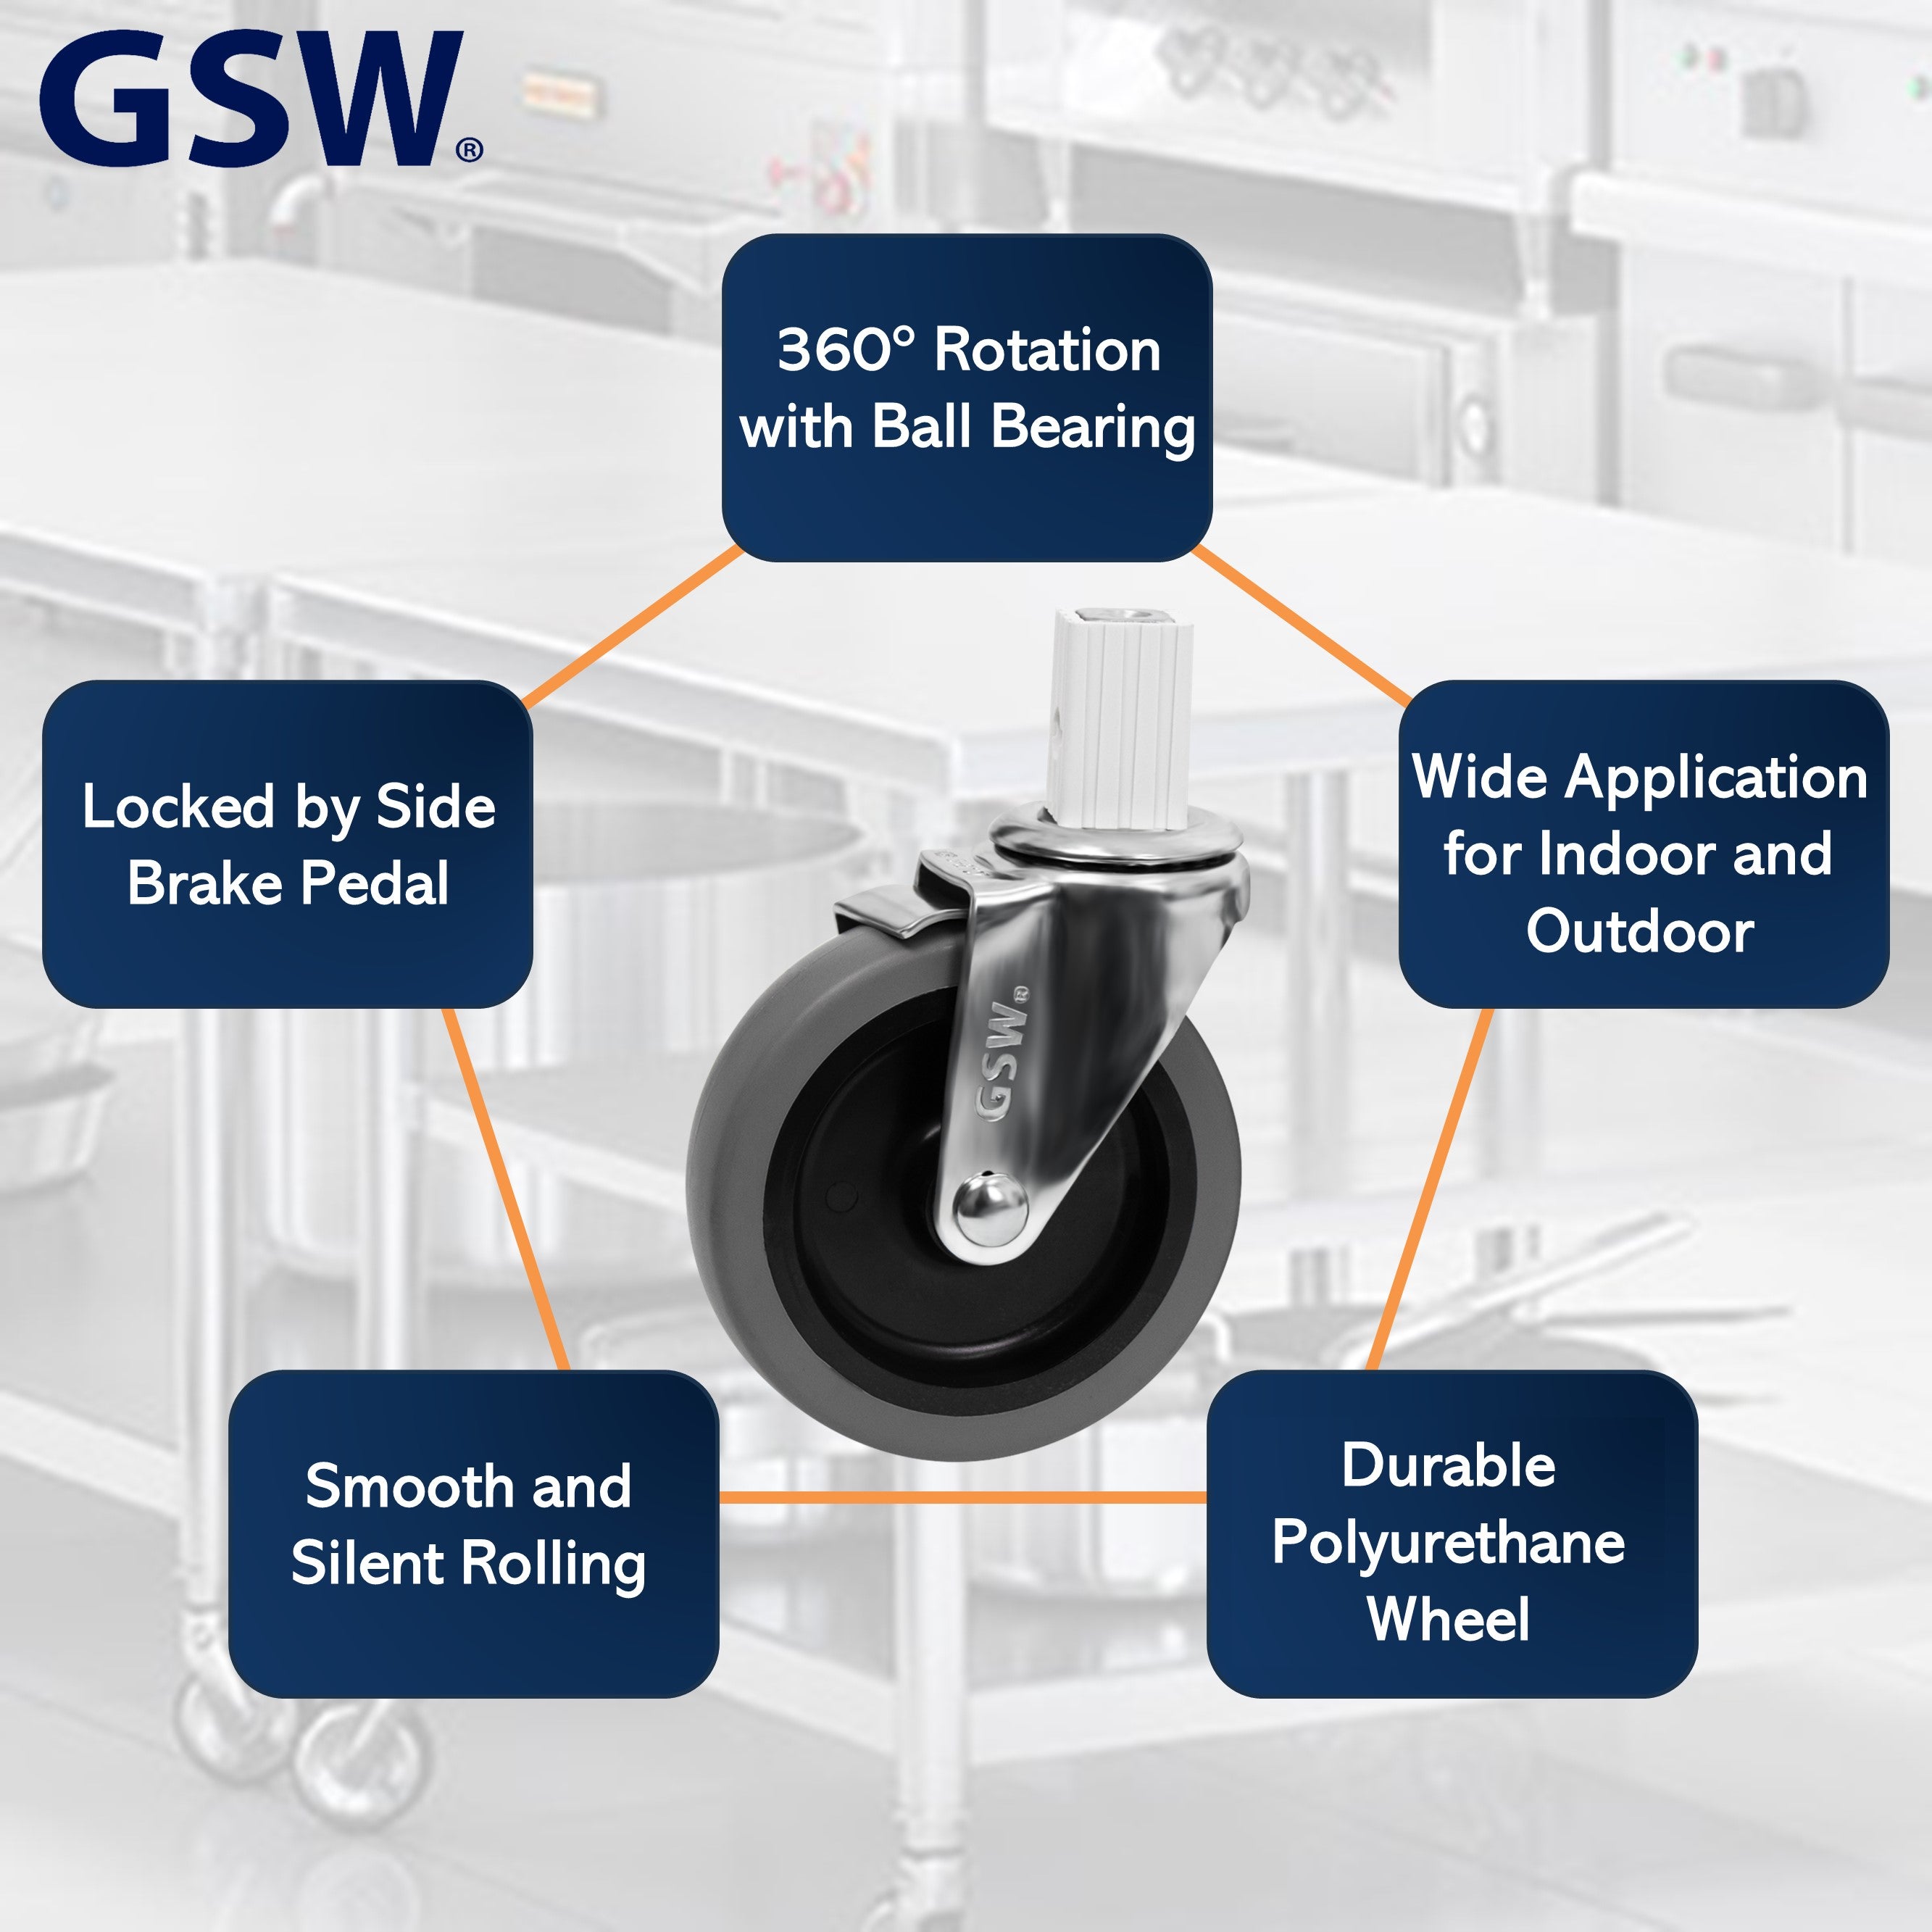 GSW 4" Square Stem Casters with Caster socket - Loading Capacity: 800 lbs; use for GSW Utility Carts (C-31K & C-32K), Service Carts, and Shelf Steel Carts (Swivel With Brake)